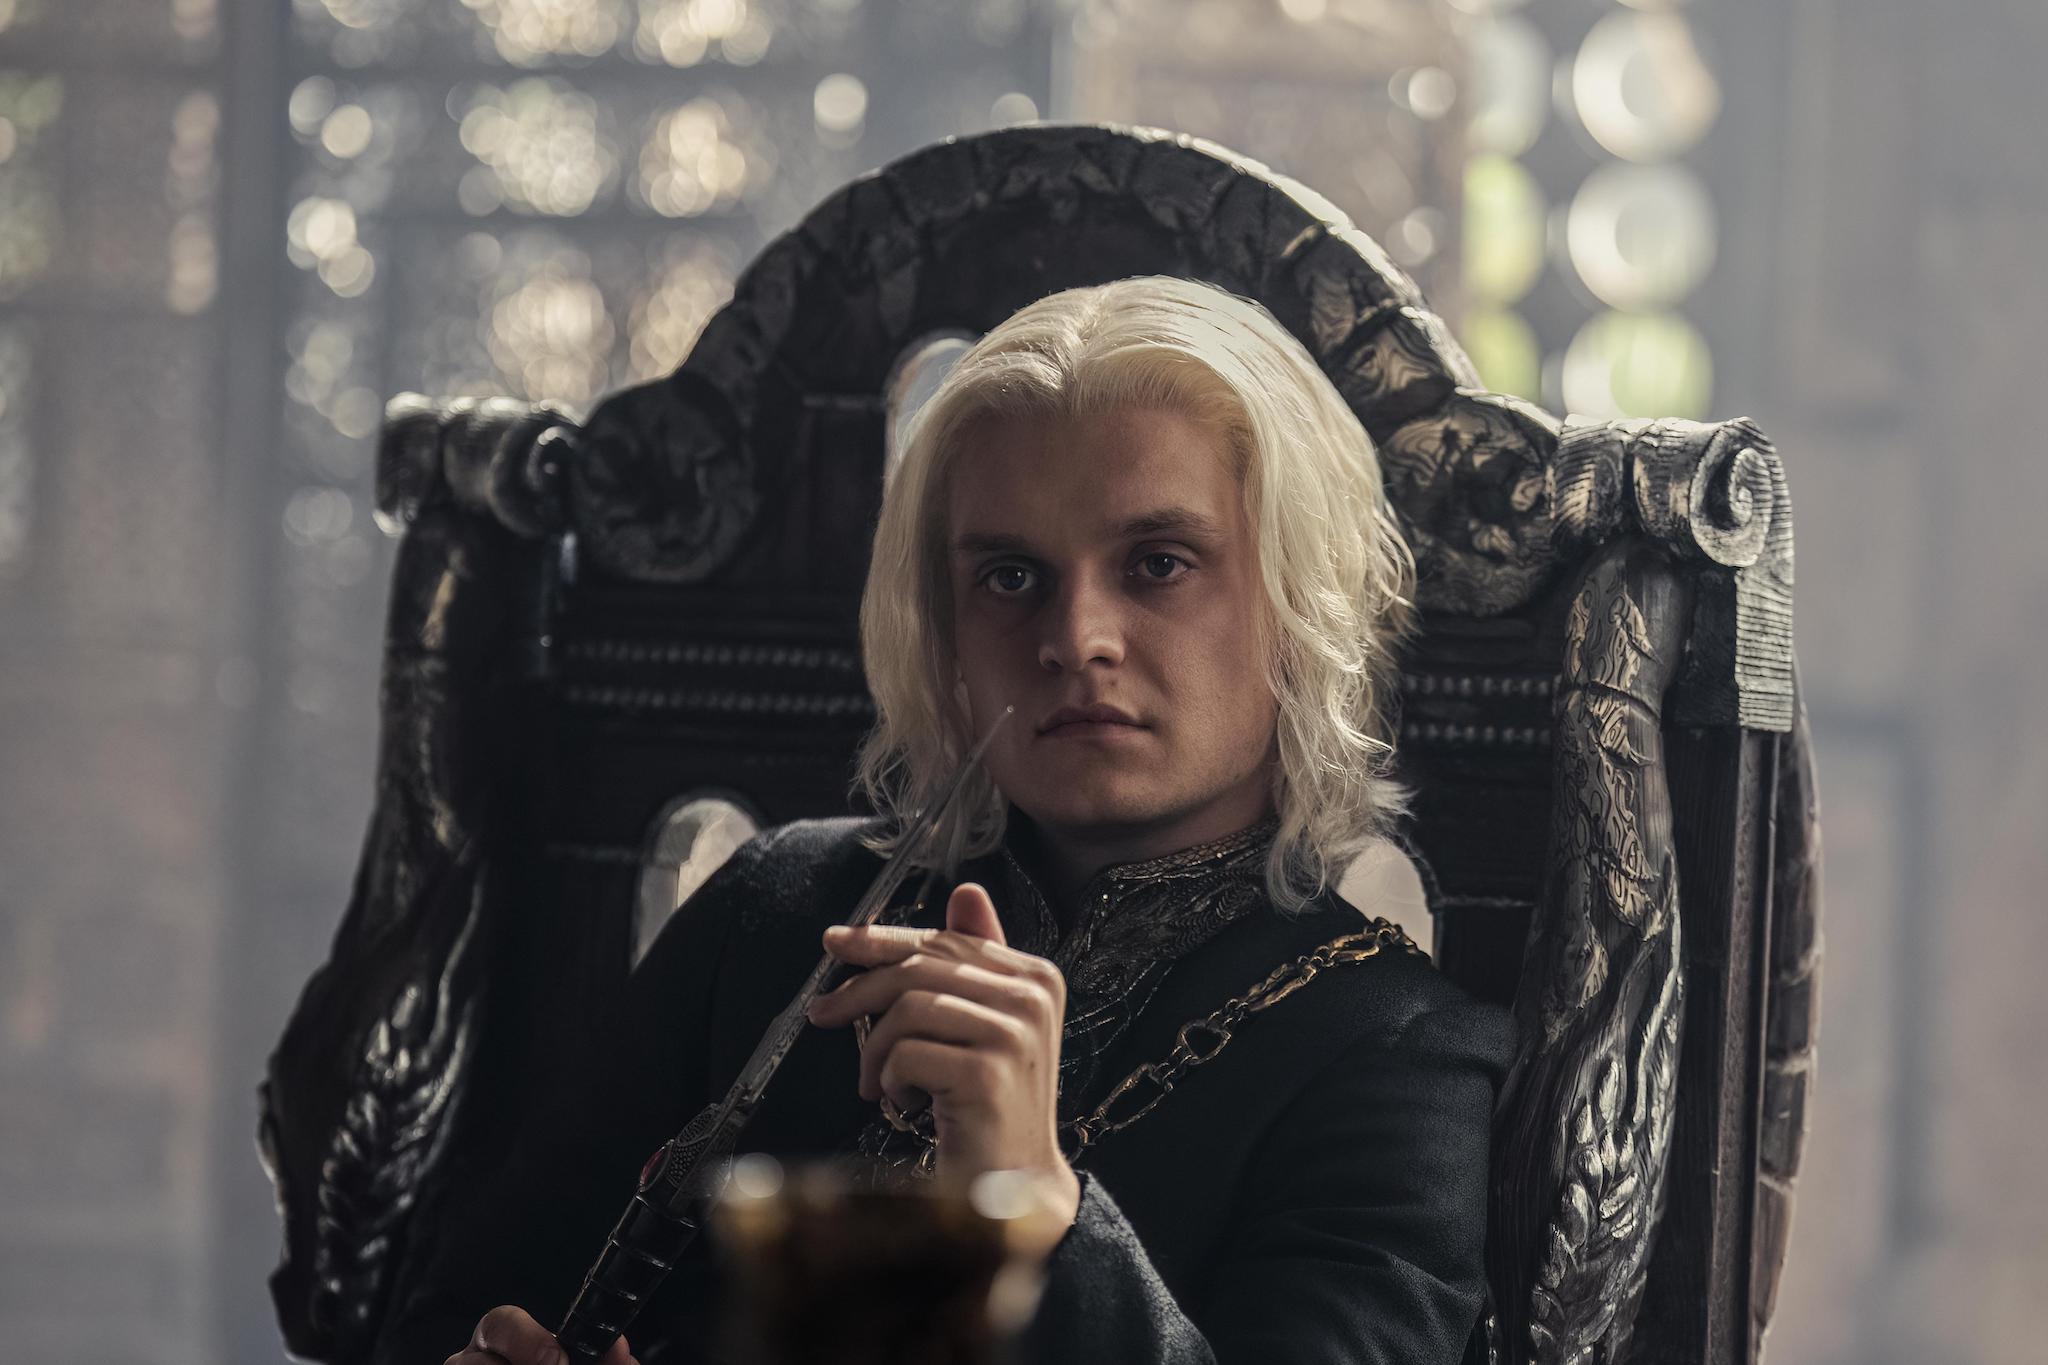 house of the dragon, game of thrones, alfie allen, house of the dragon’s tom glynn-carney: ‘game of thrones was a little too close to oversexualising women’